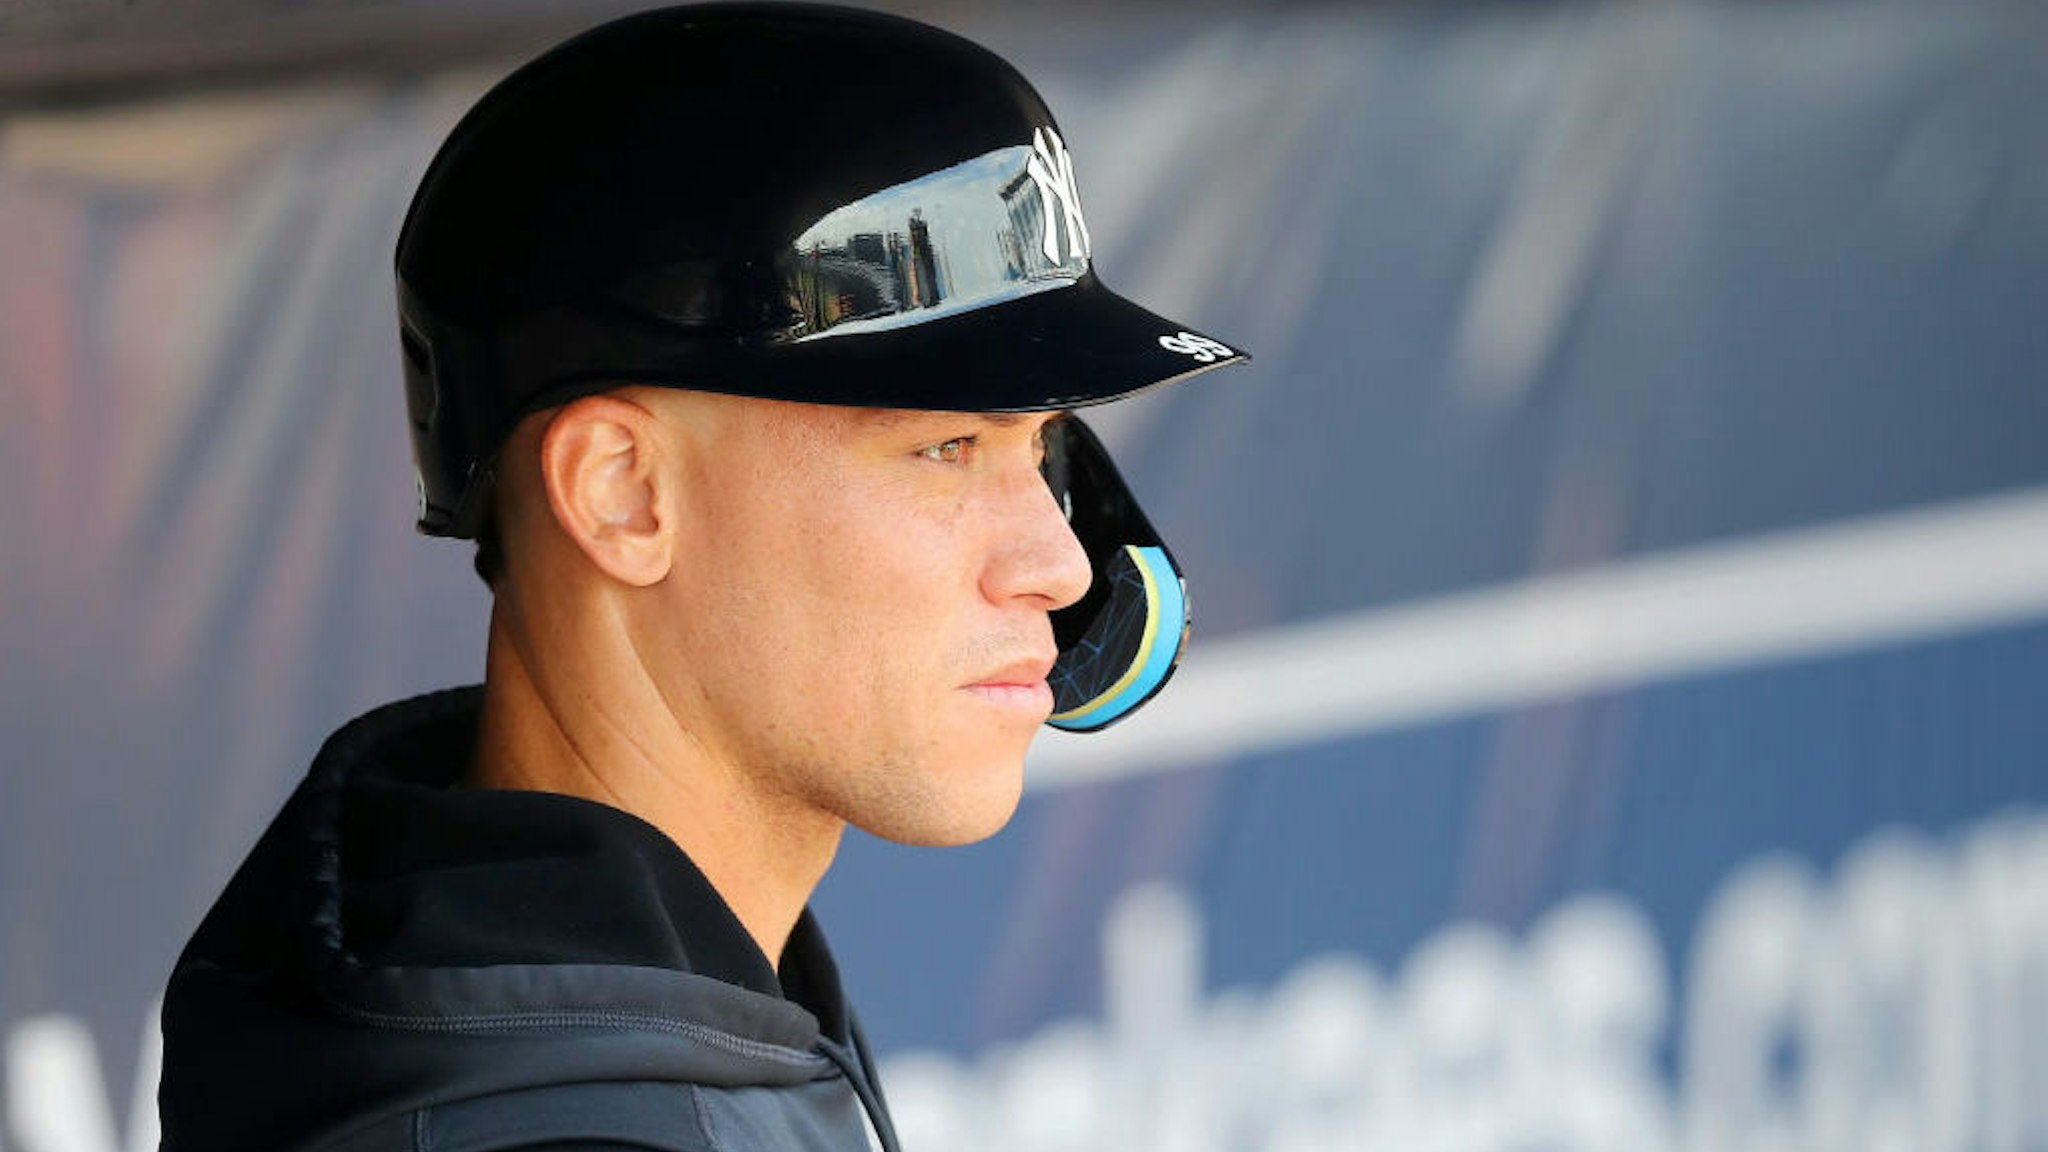 TAMPA, FL - MARCH 15: Aaron Judge (99) looks out onto the field during the Yankees spring training workout on March 15, 2022, at Steinbrenner Field in Tampa, FL. (Photo by Cliff Welch/Icon Sportswire via Getty Images)